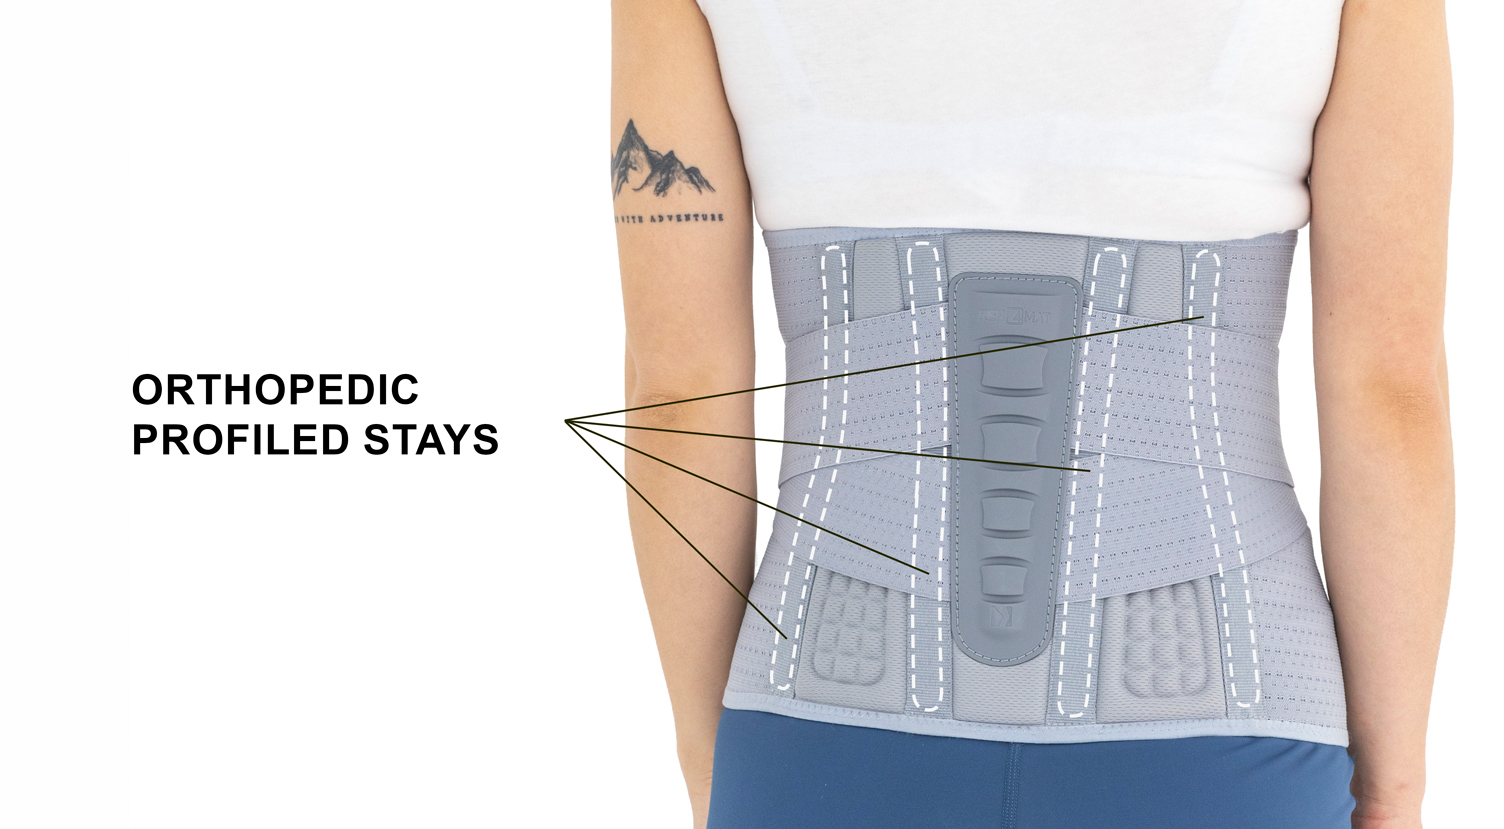 LOWER BACK BRACE AM-SO-06  Reh4Mat – lower limb orthosis and braces -  Manufacturer of modern orthopaedic devices